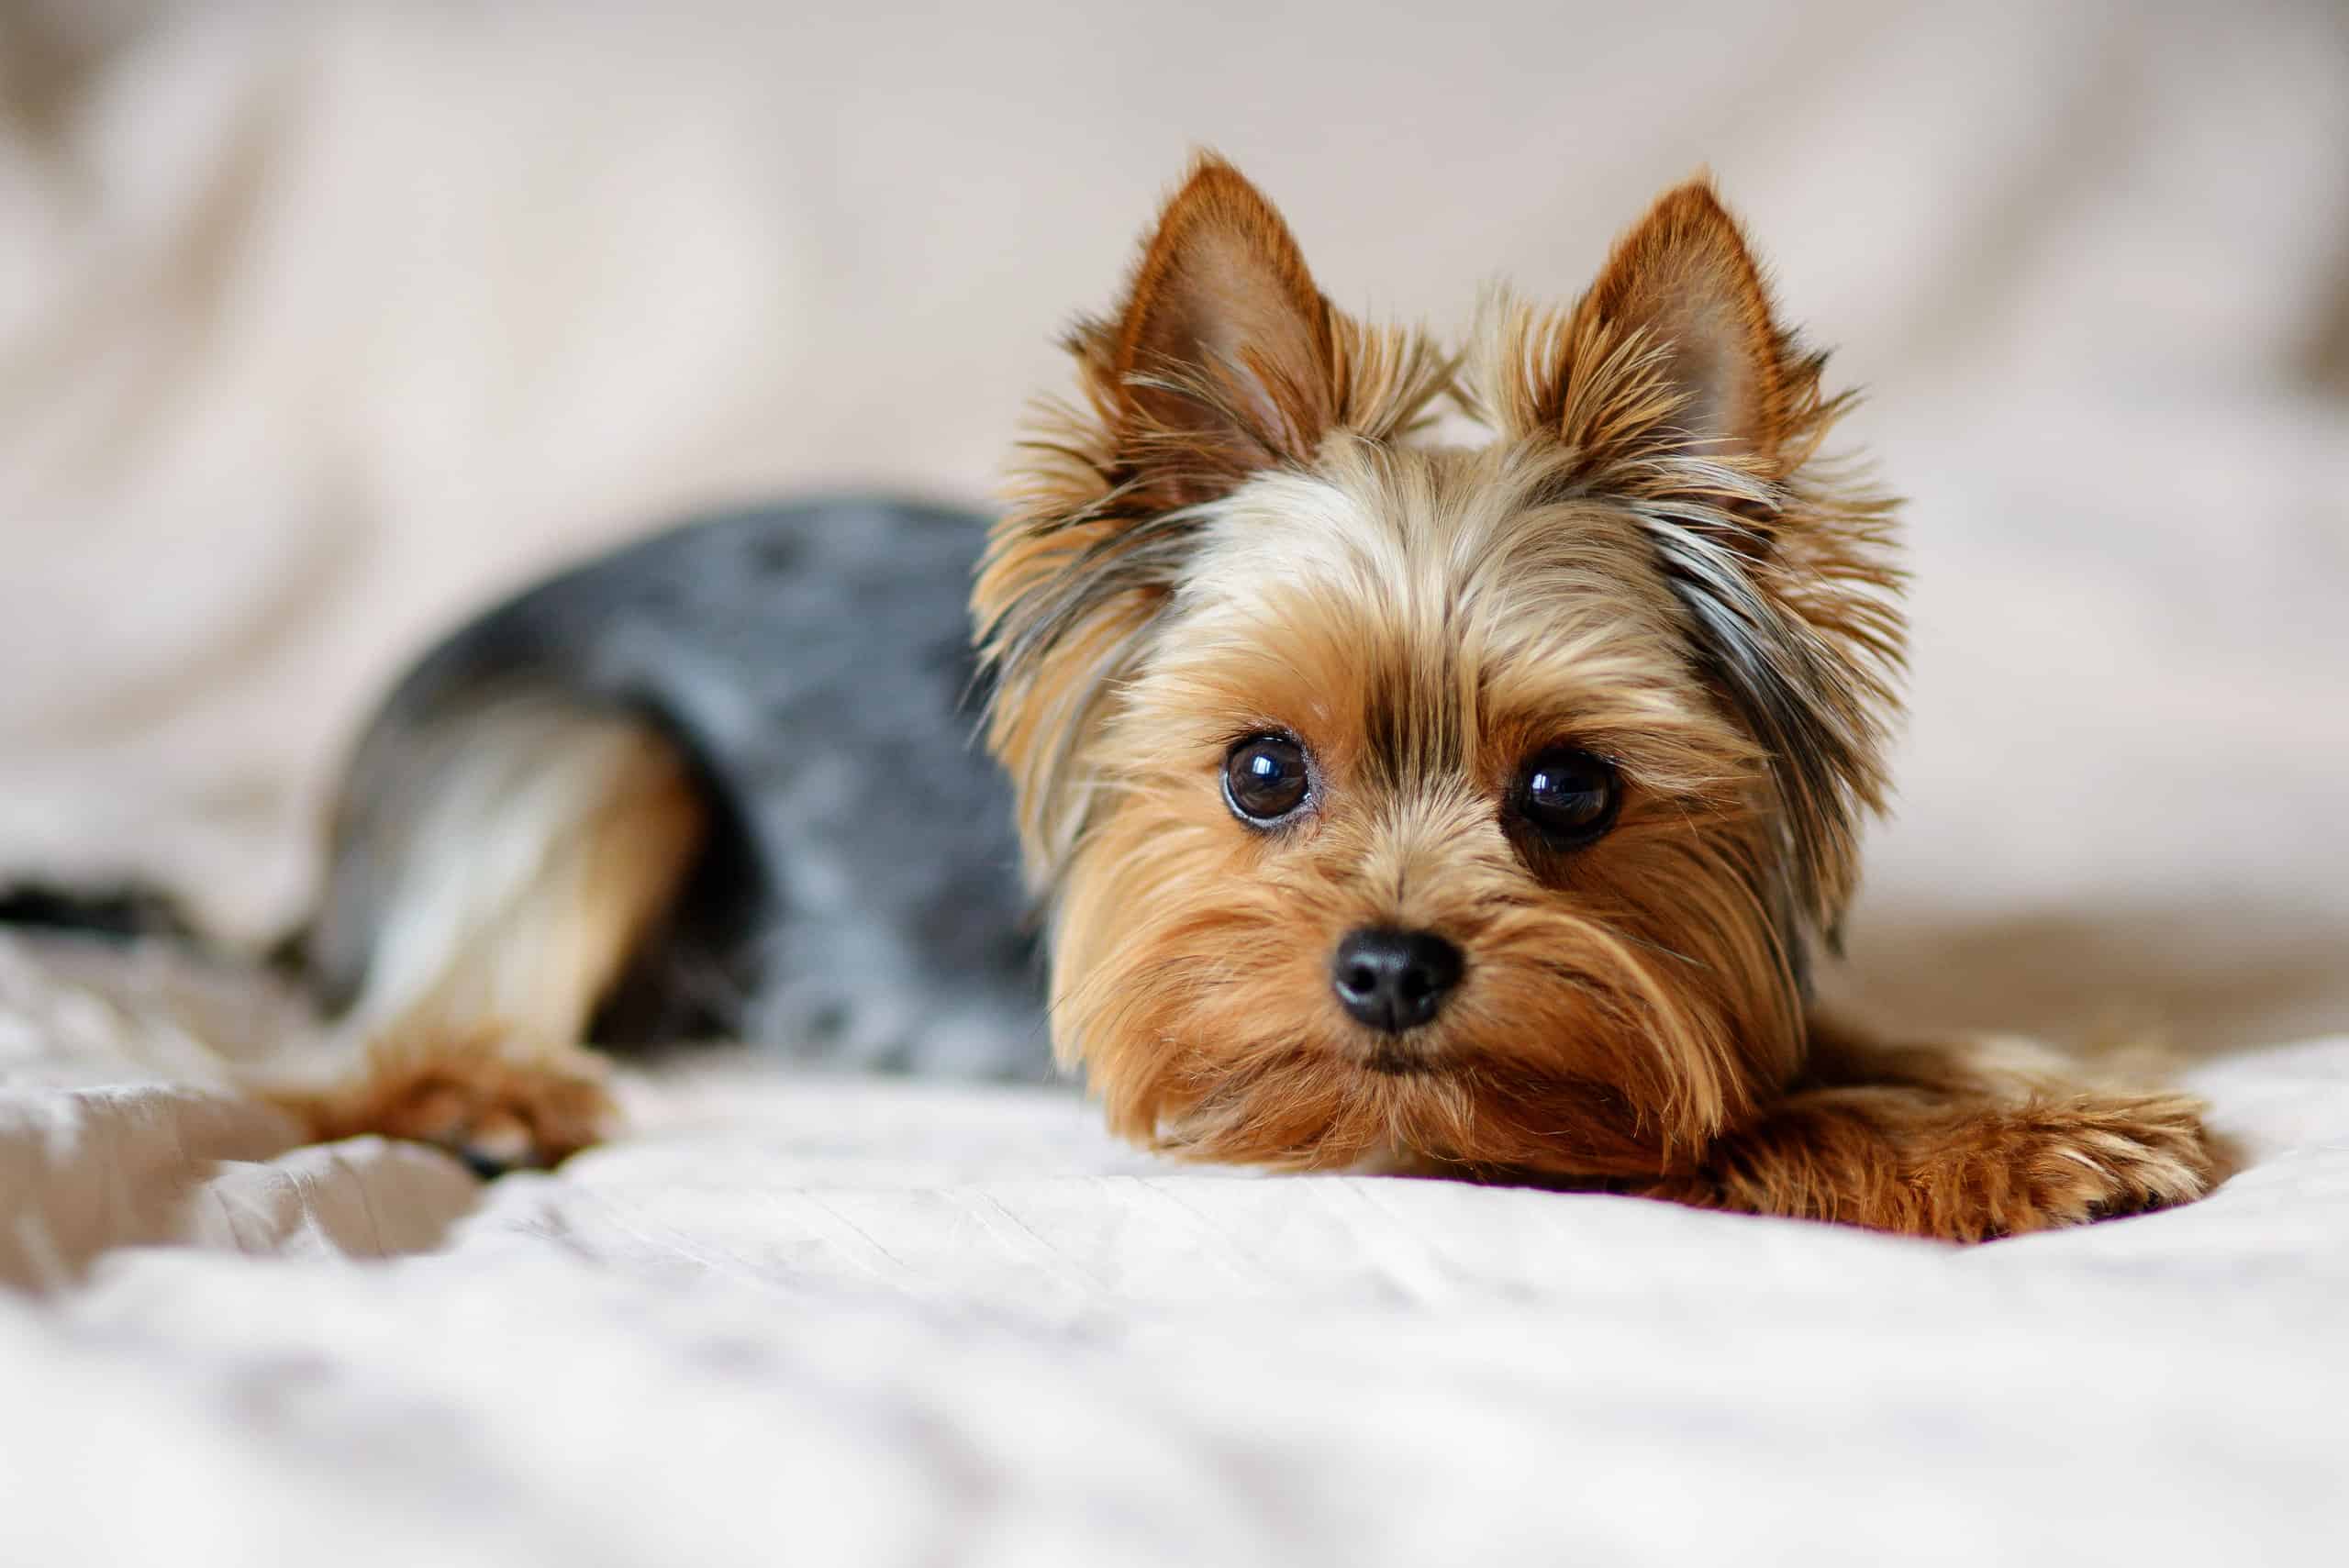 which yorkie is more expensive?